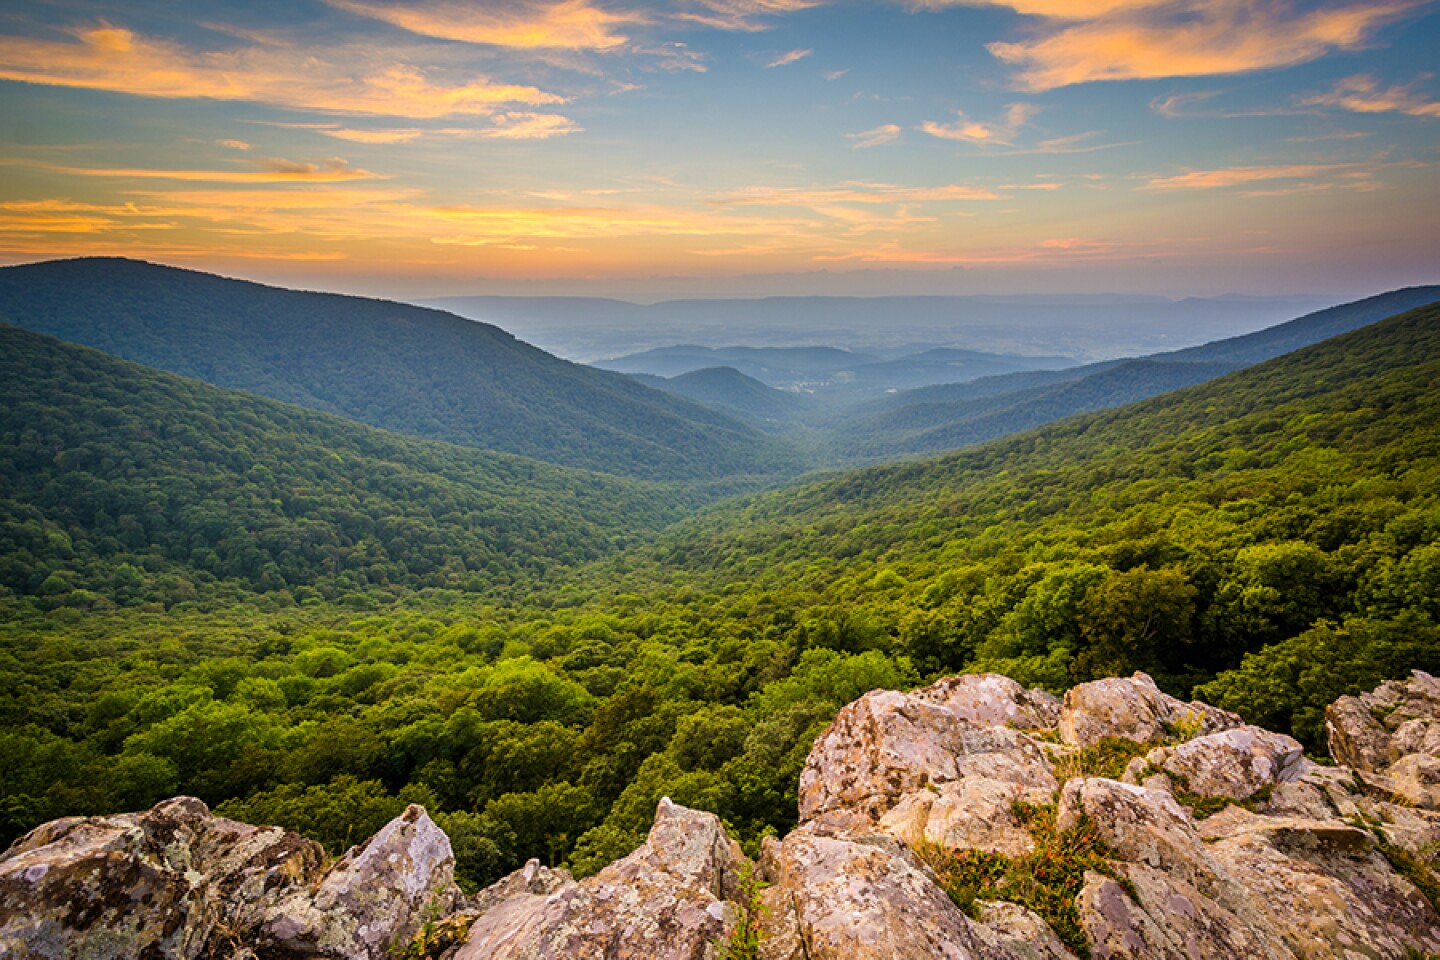 <h2>Lodges along the Appalachian Trail, Shenandoah National Park</h2> <ul>   <li><b>Book now: </b><a class="Link" href="https://www.goshenandoah.com/specials/hiking-packages" rel="noopener">Hike Lodge to Lodge in Shenandoah National Park</a>; $50–$431 per night</li>  </ul> <p>For a luxurious introduction to the famed Appalachian Trail, head to <a class="Link" href="https://www.afar.com/places/shenandoah-national-park-virginia" rel="noopener">Shenandoah National Park </a>in Virginia for a two- or three-night self-guided tour along this brief but scenic stretch of the 2,190-mile trail, You’ll hike from Lewis Mountain Cabins to Big Meadows Lodge to Skyland, which are operated by authorized park concessionaire Delaware North Parks and Resorts at Shenandoah.</p> <p>Each day, you’ll trek between seven to nine miles through deciduous forests and past soft green peaks, traveling from one night’s accommodations to the next. Big Meadows and Skyland offer hikers packed lunches and trail memorabilia if you book a hiking package in advance <a class="Link" href="https://www.goshenandoah.com/specials/hiking-packages" rel="noopener">online</a> or by calling the reservation line. (You can also book each stay individually, but lunch won’t be included.) The reservations office will also share contact info for shuttle services to take you back to your car at the end of the one-way journey.</p>